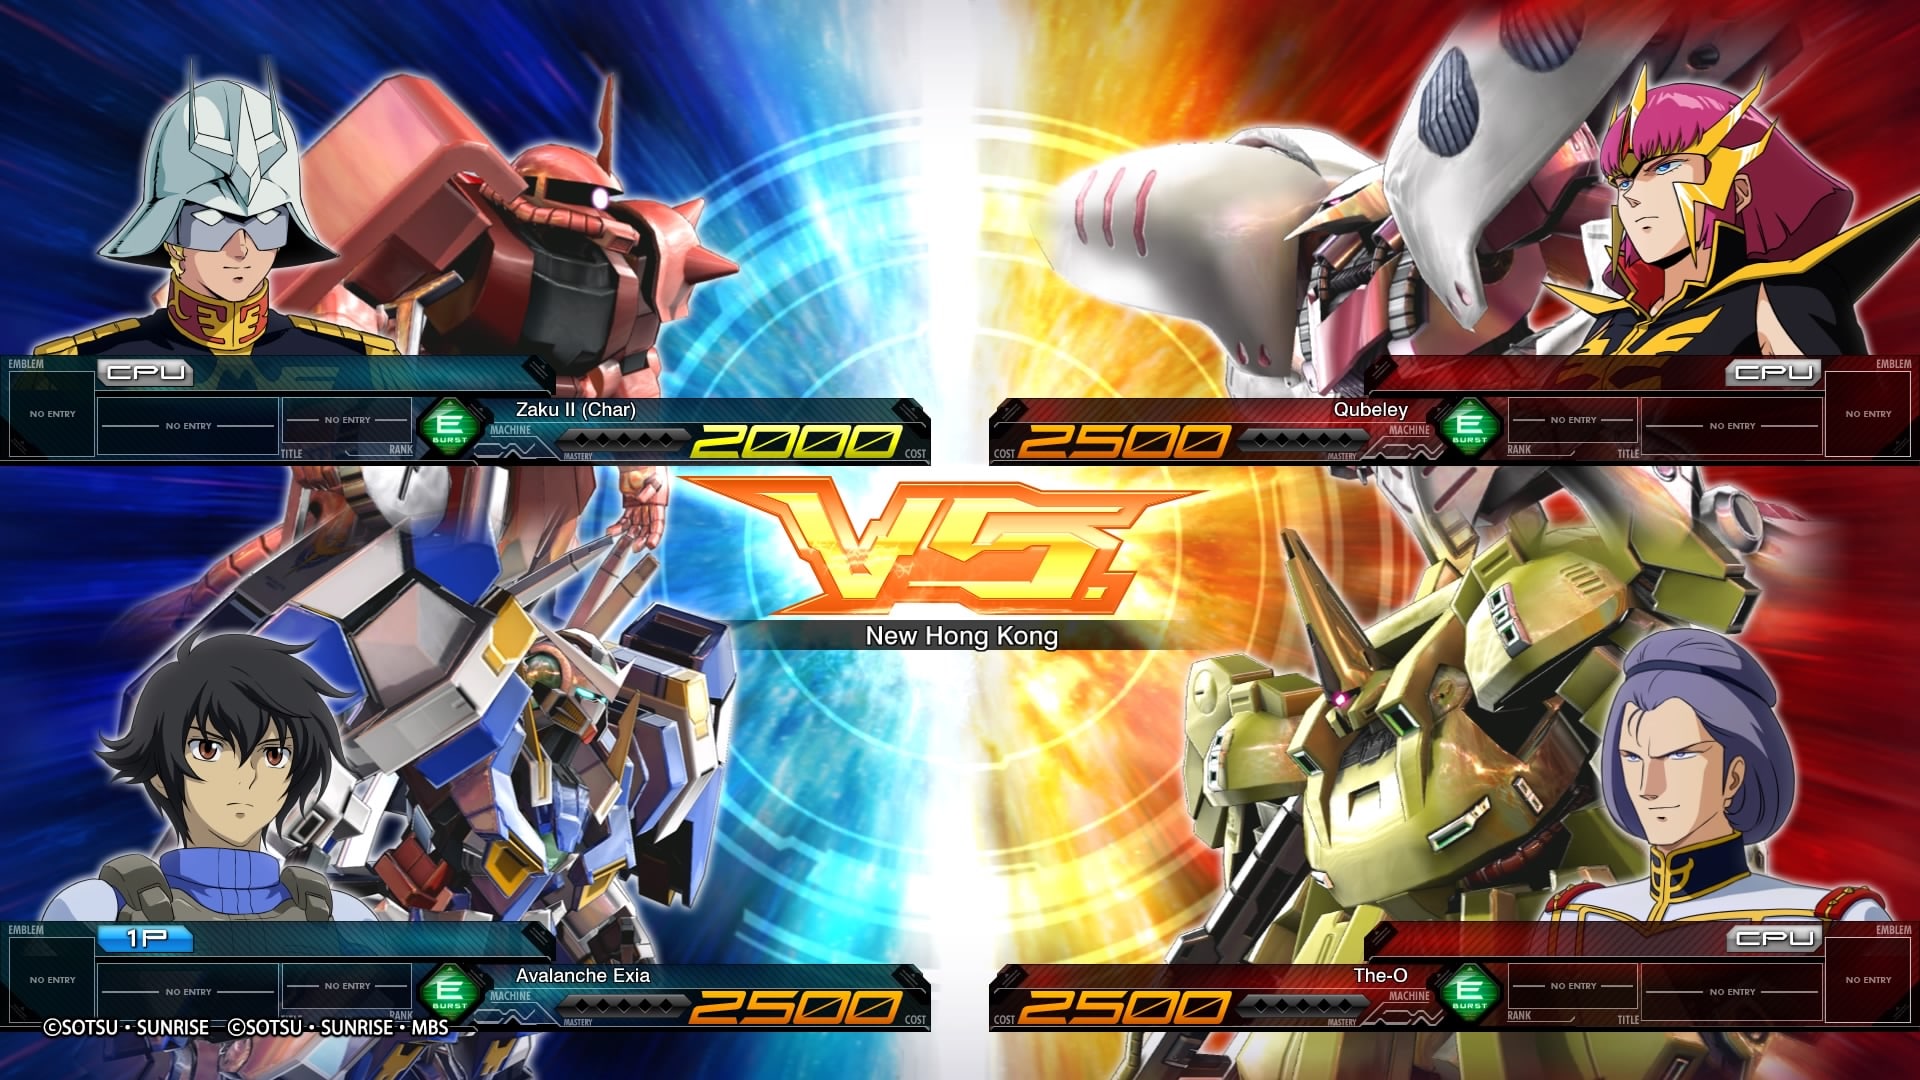 Mobile Suit Gundam Extreme Vs. Maxiboost ON Review